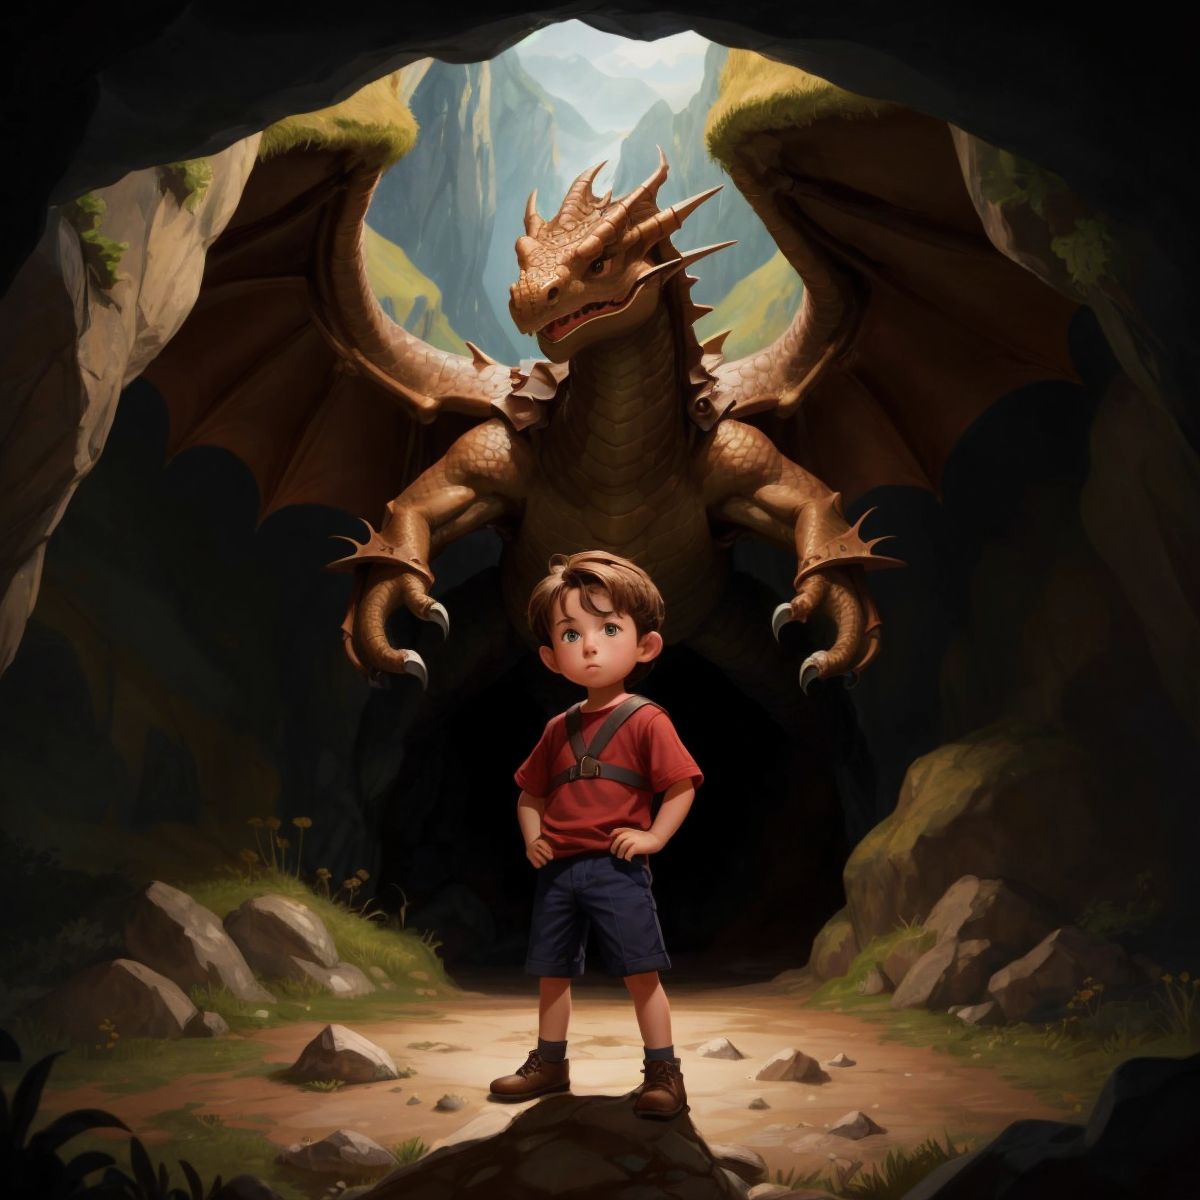 Alex standing bravely in front of a cavern guarded by a fearsome dragon.